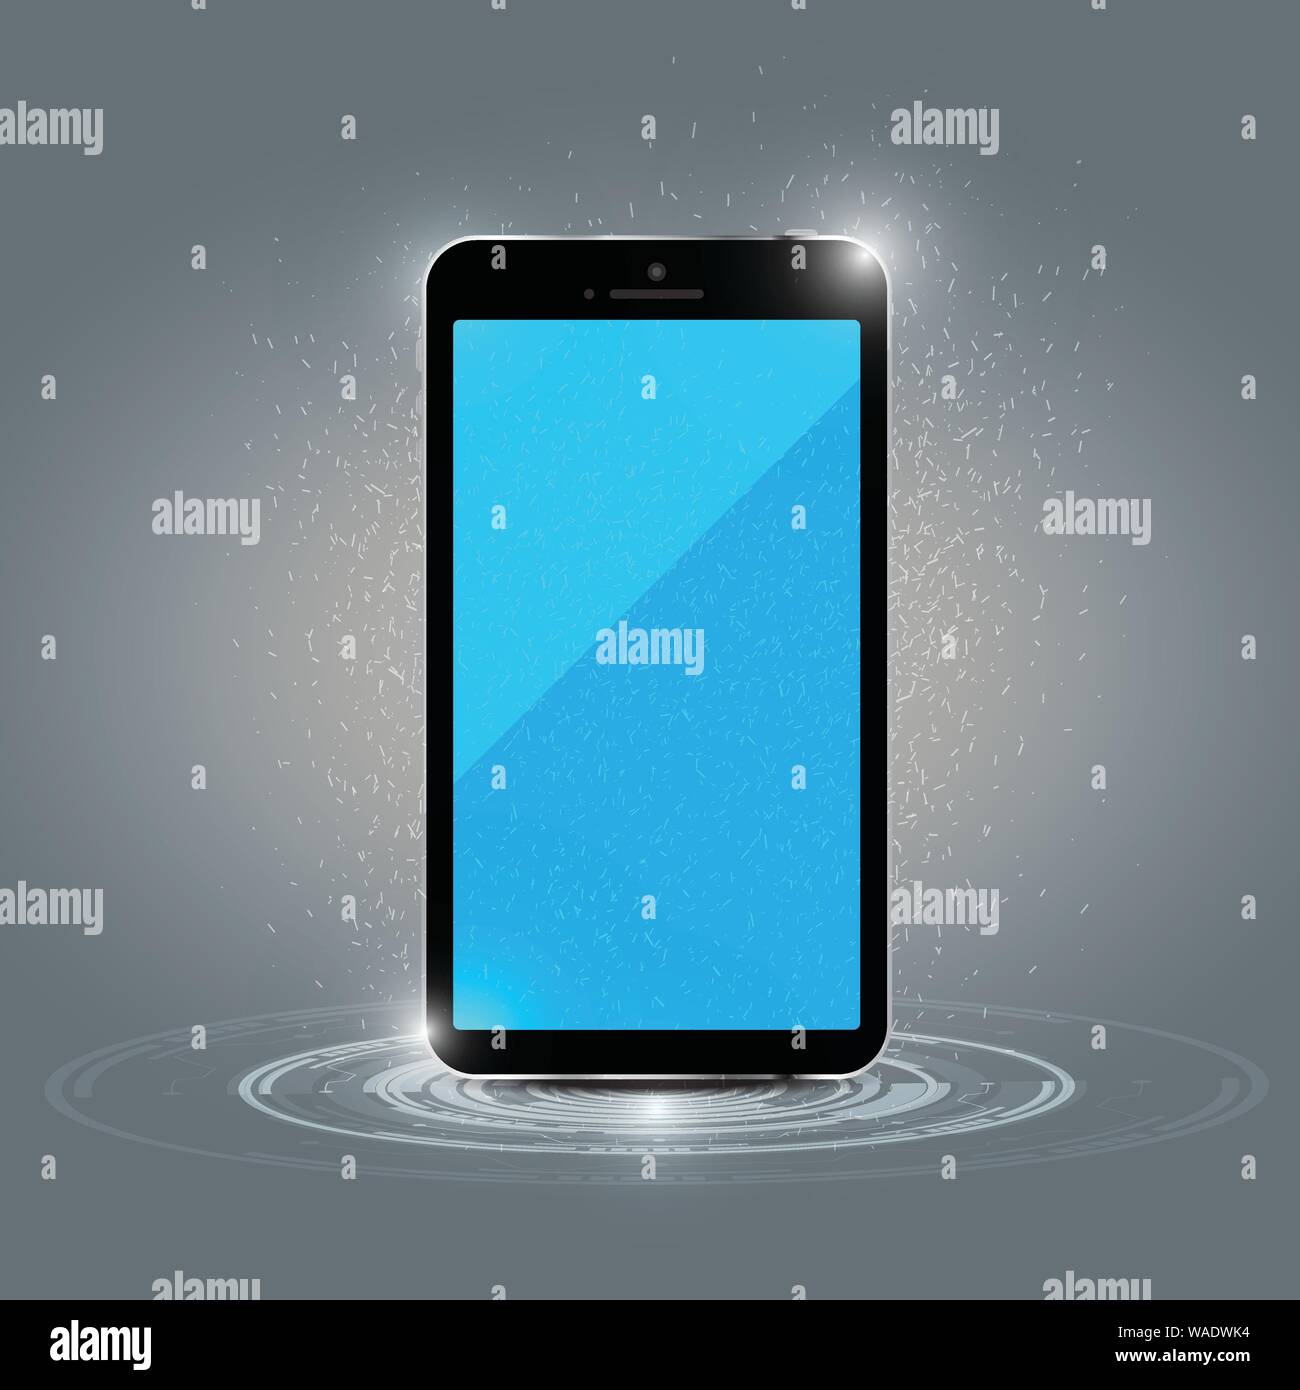 Mobile phone charging concept Stock Vector